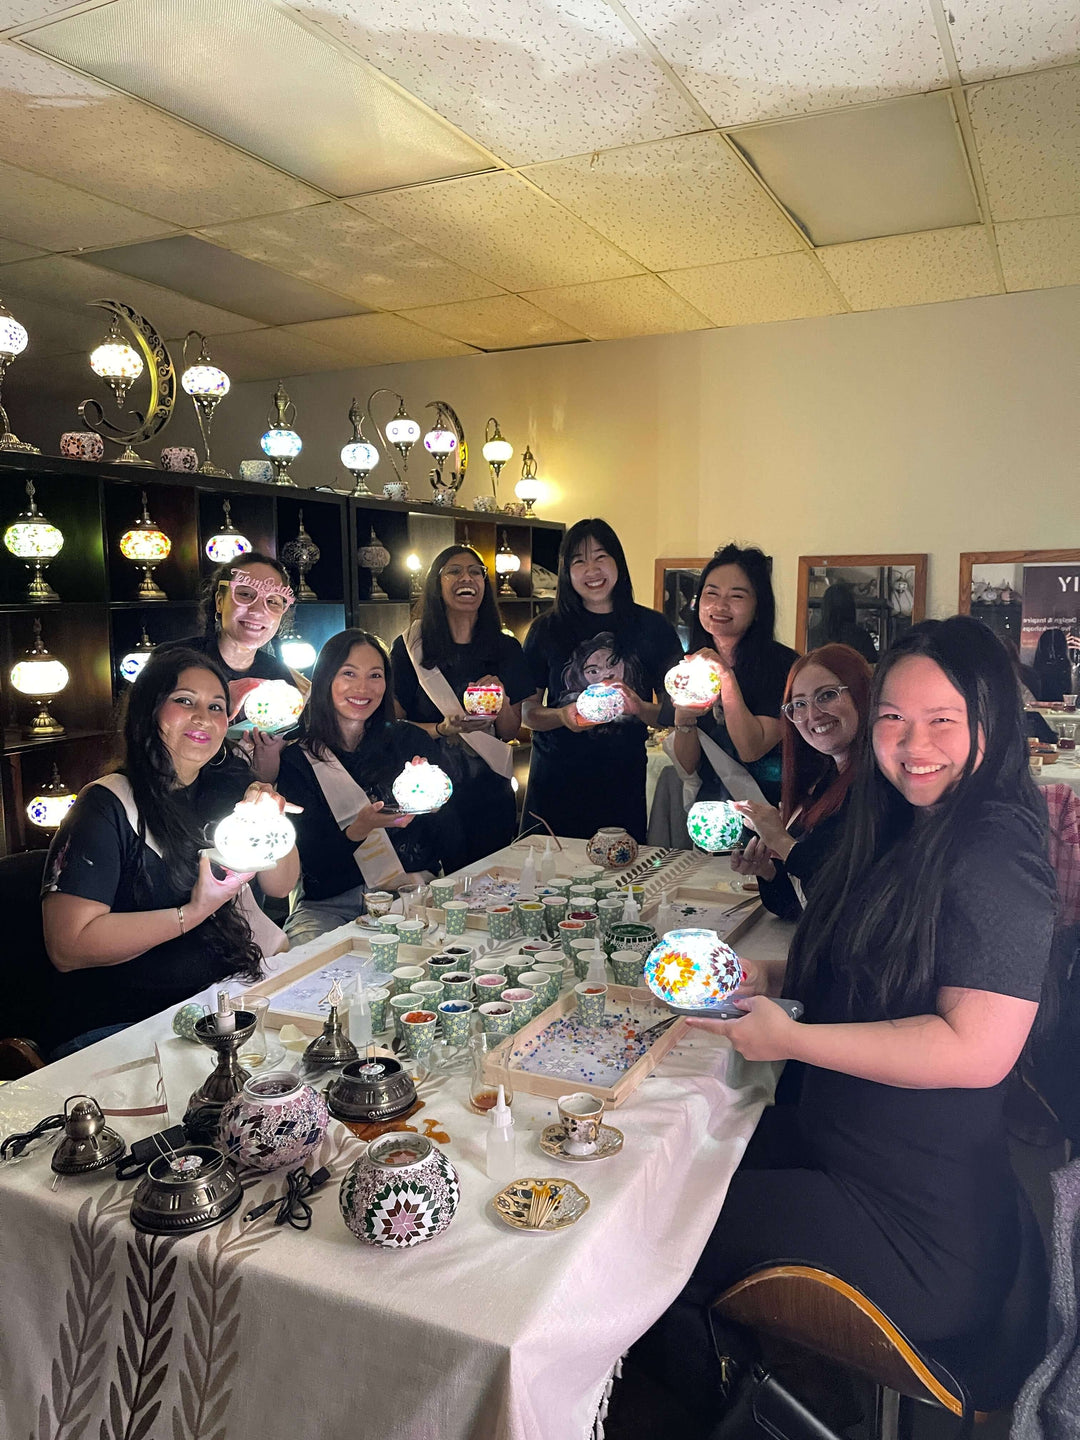 An Unforgettable Bachelor Party: Mosaic Lamp Workshop in Houston